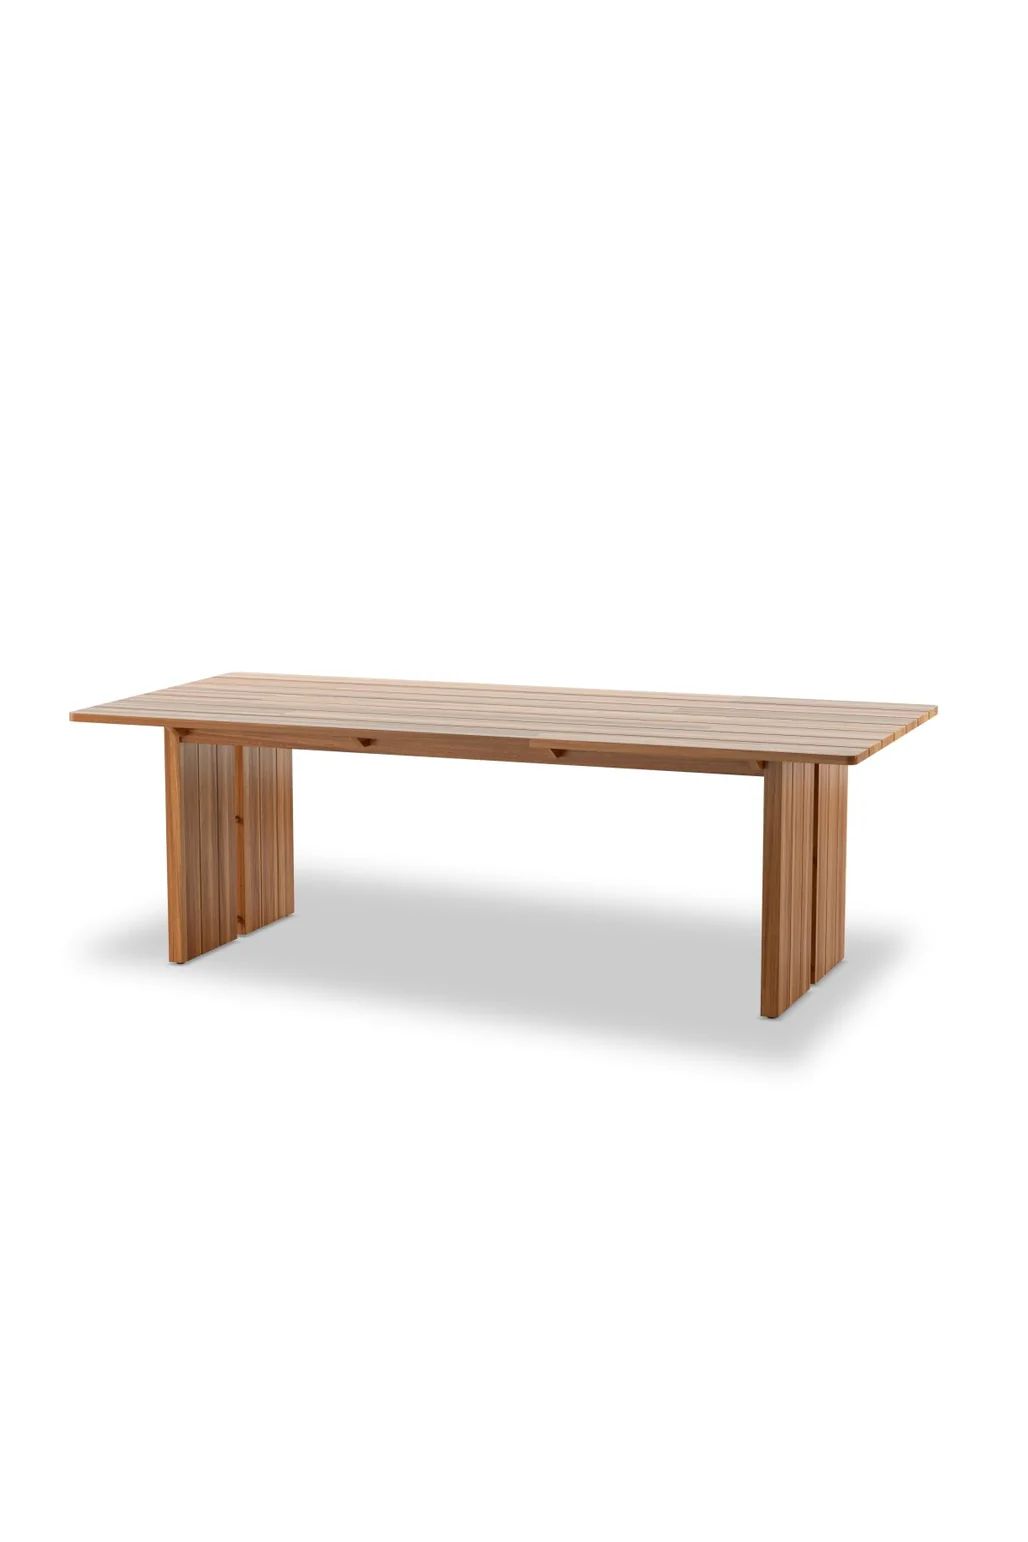 Chappy Outdoor Dining Table - 2 Sizes | THELIFESTYLEDCO